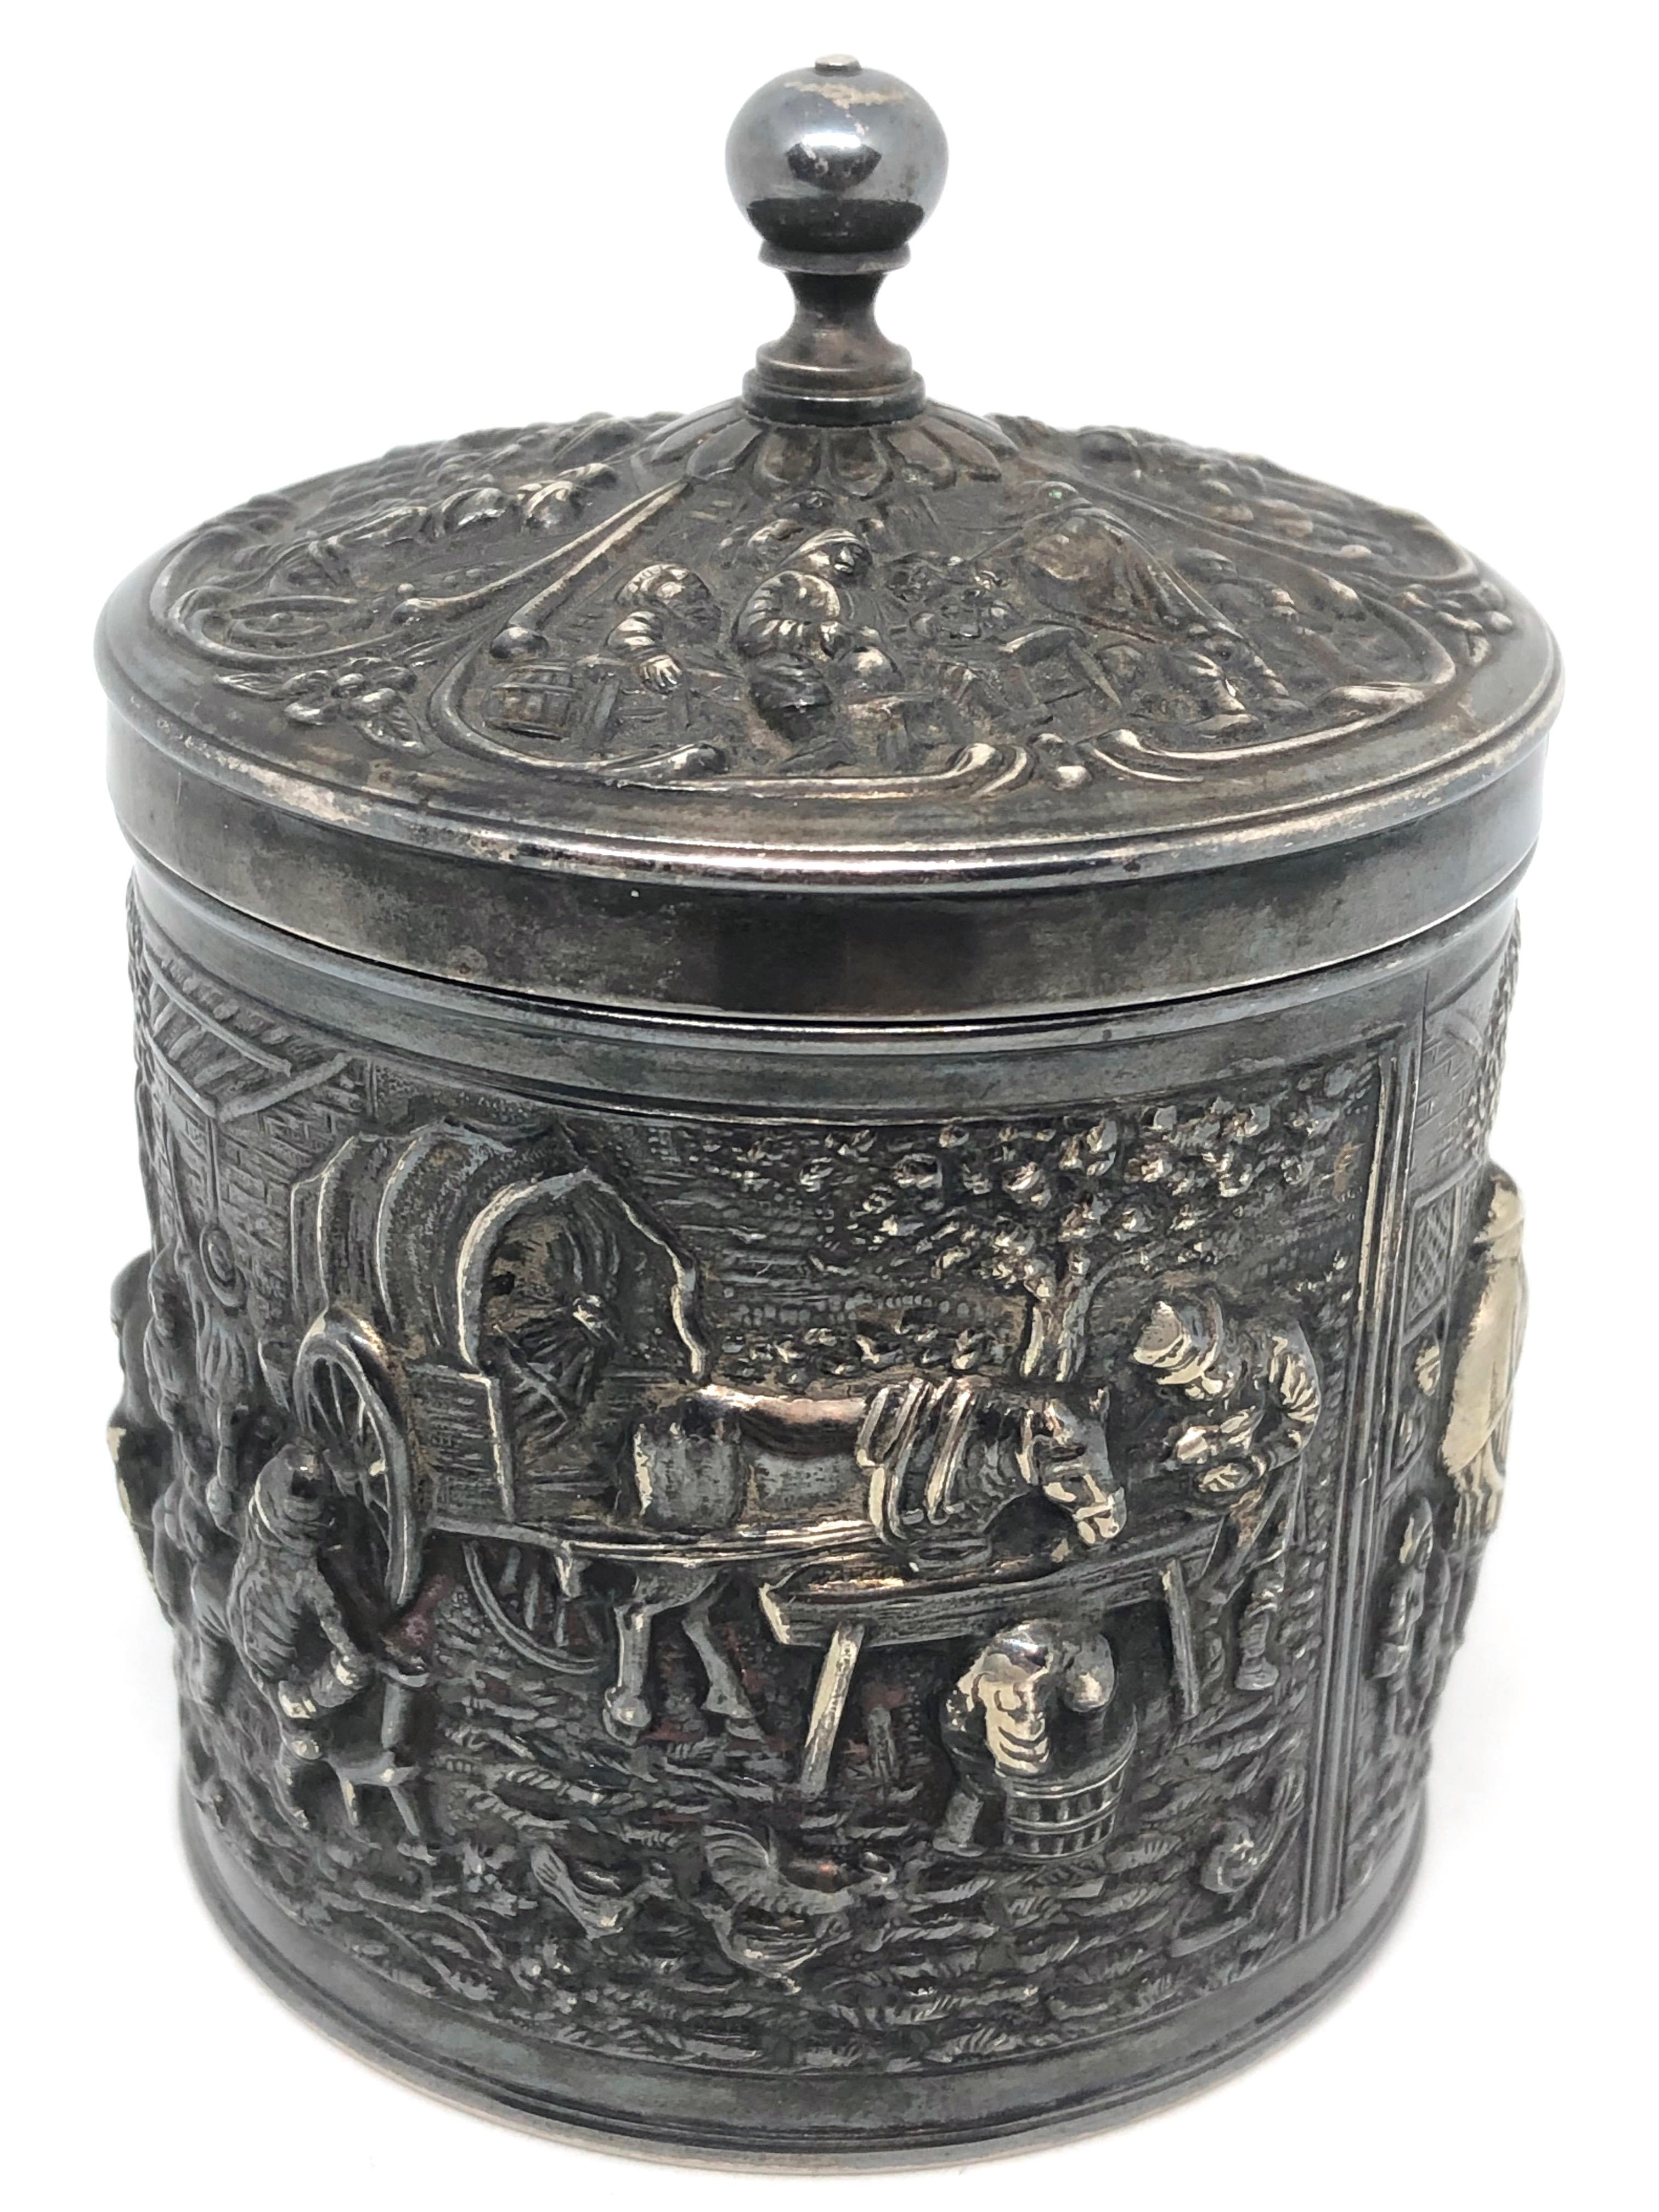 Gorgeous silver plated tea caddy, made by silver factory Herman Hooijkaas for Dutch coffee and tea company Douwe Egberts. The caddy has a hammered decoration of a wagon and horse and a group of people making music. Found on a estate sale in Malmo,